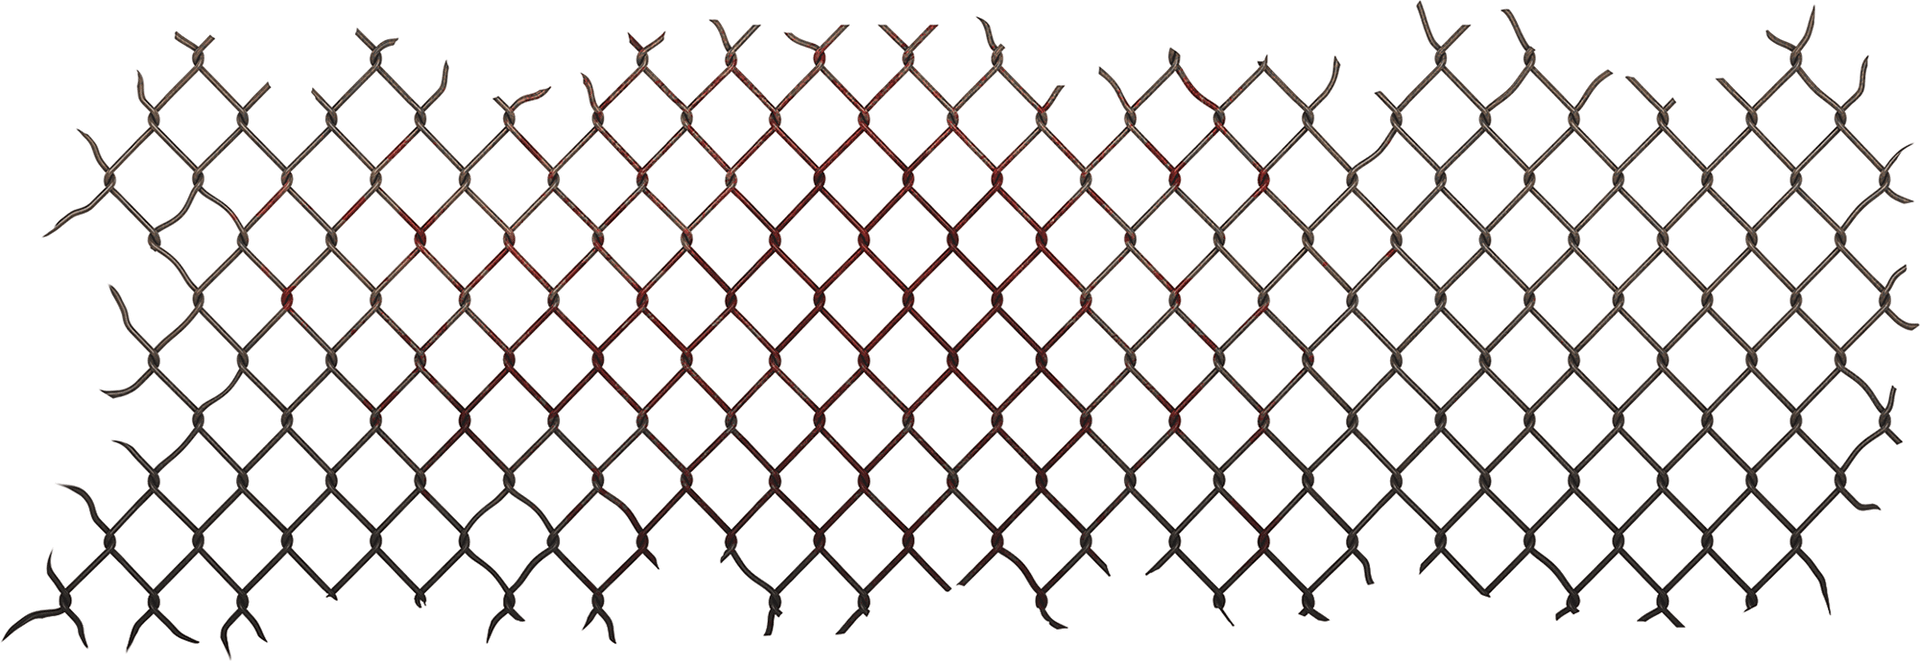 Rusty Chain Link Fence Texture PNG